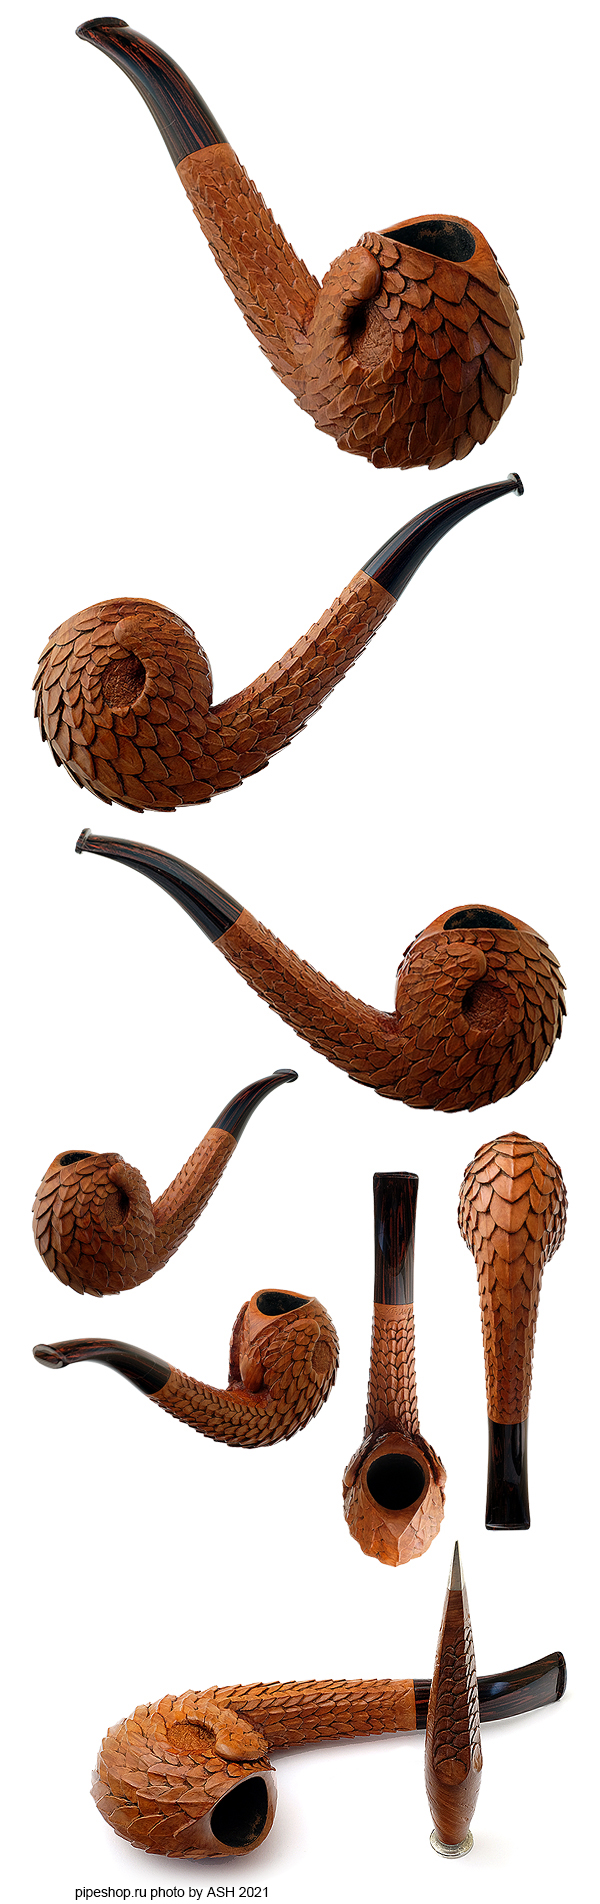    PANGOLIN WITH TAMPER ESTATE NEW